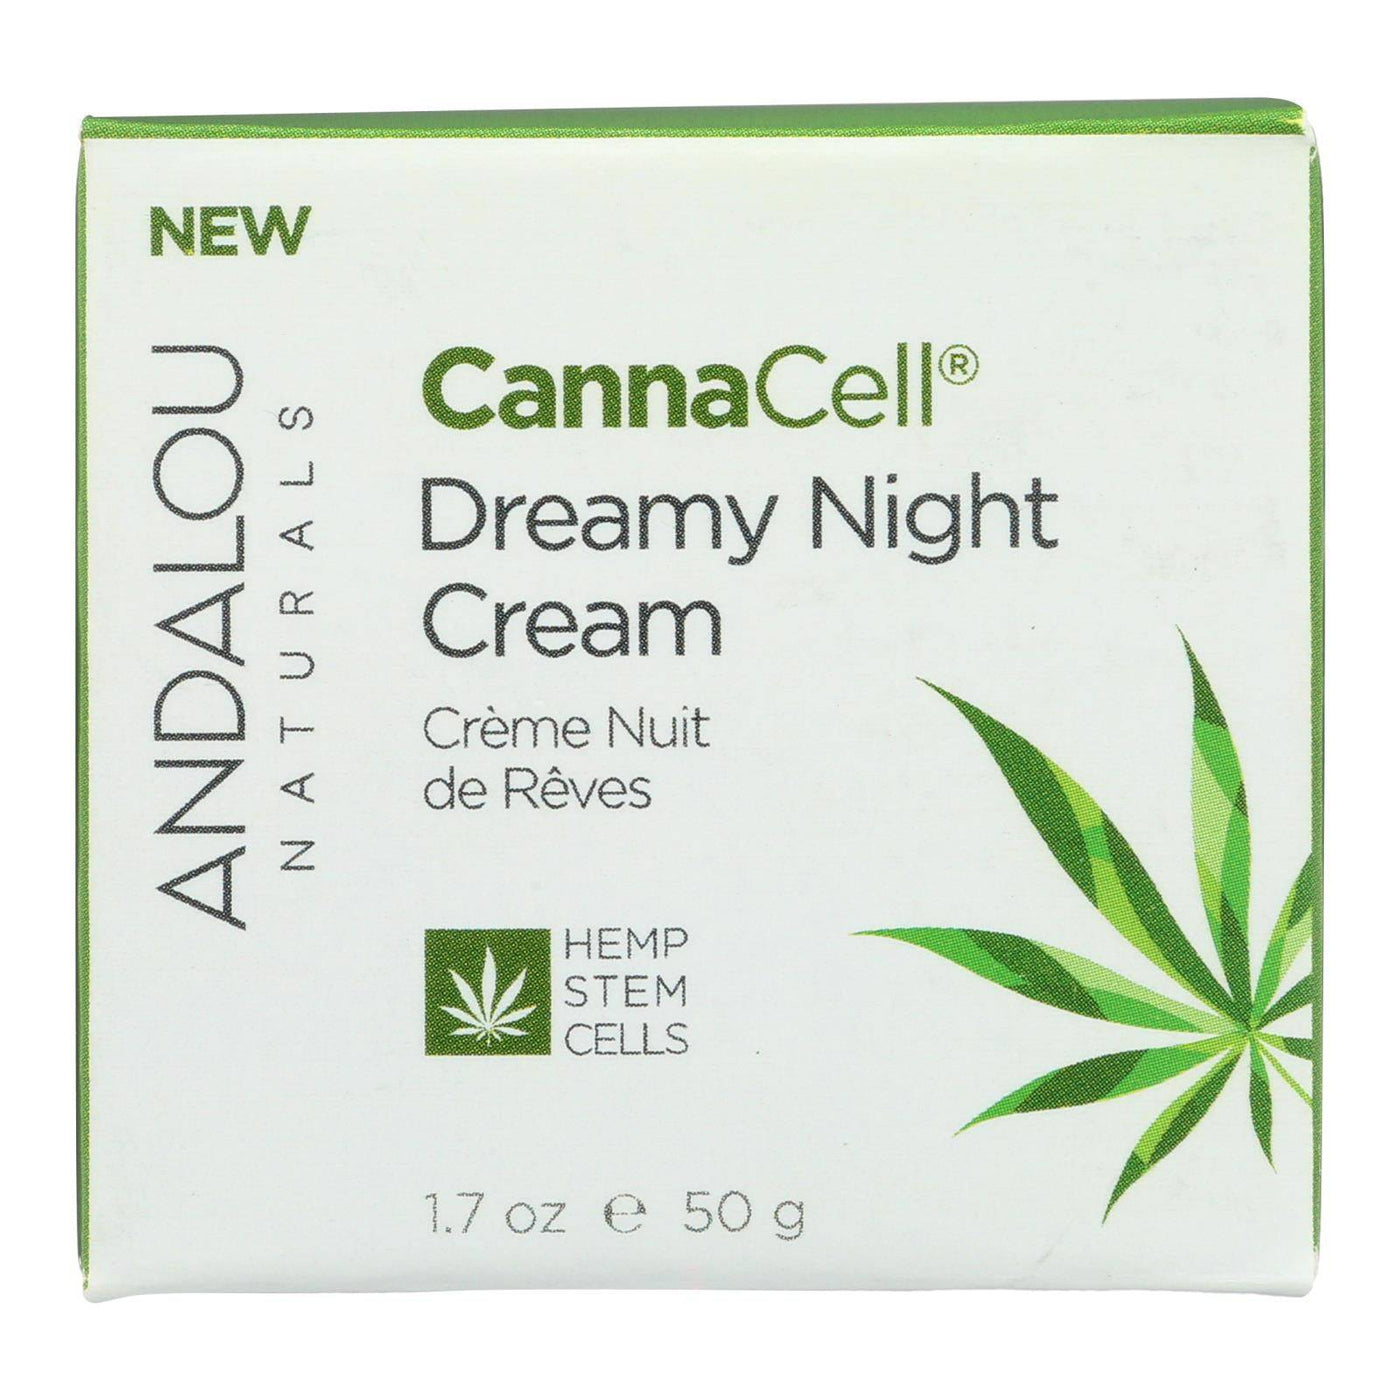 Andalou Naturals - Cannacell Dreamy Night Cream - 1.7 Oz. | OnlyNaturals.us